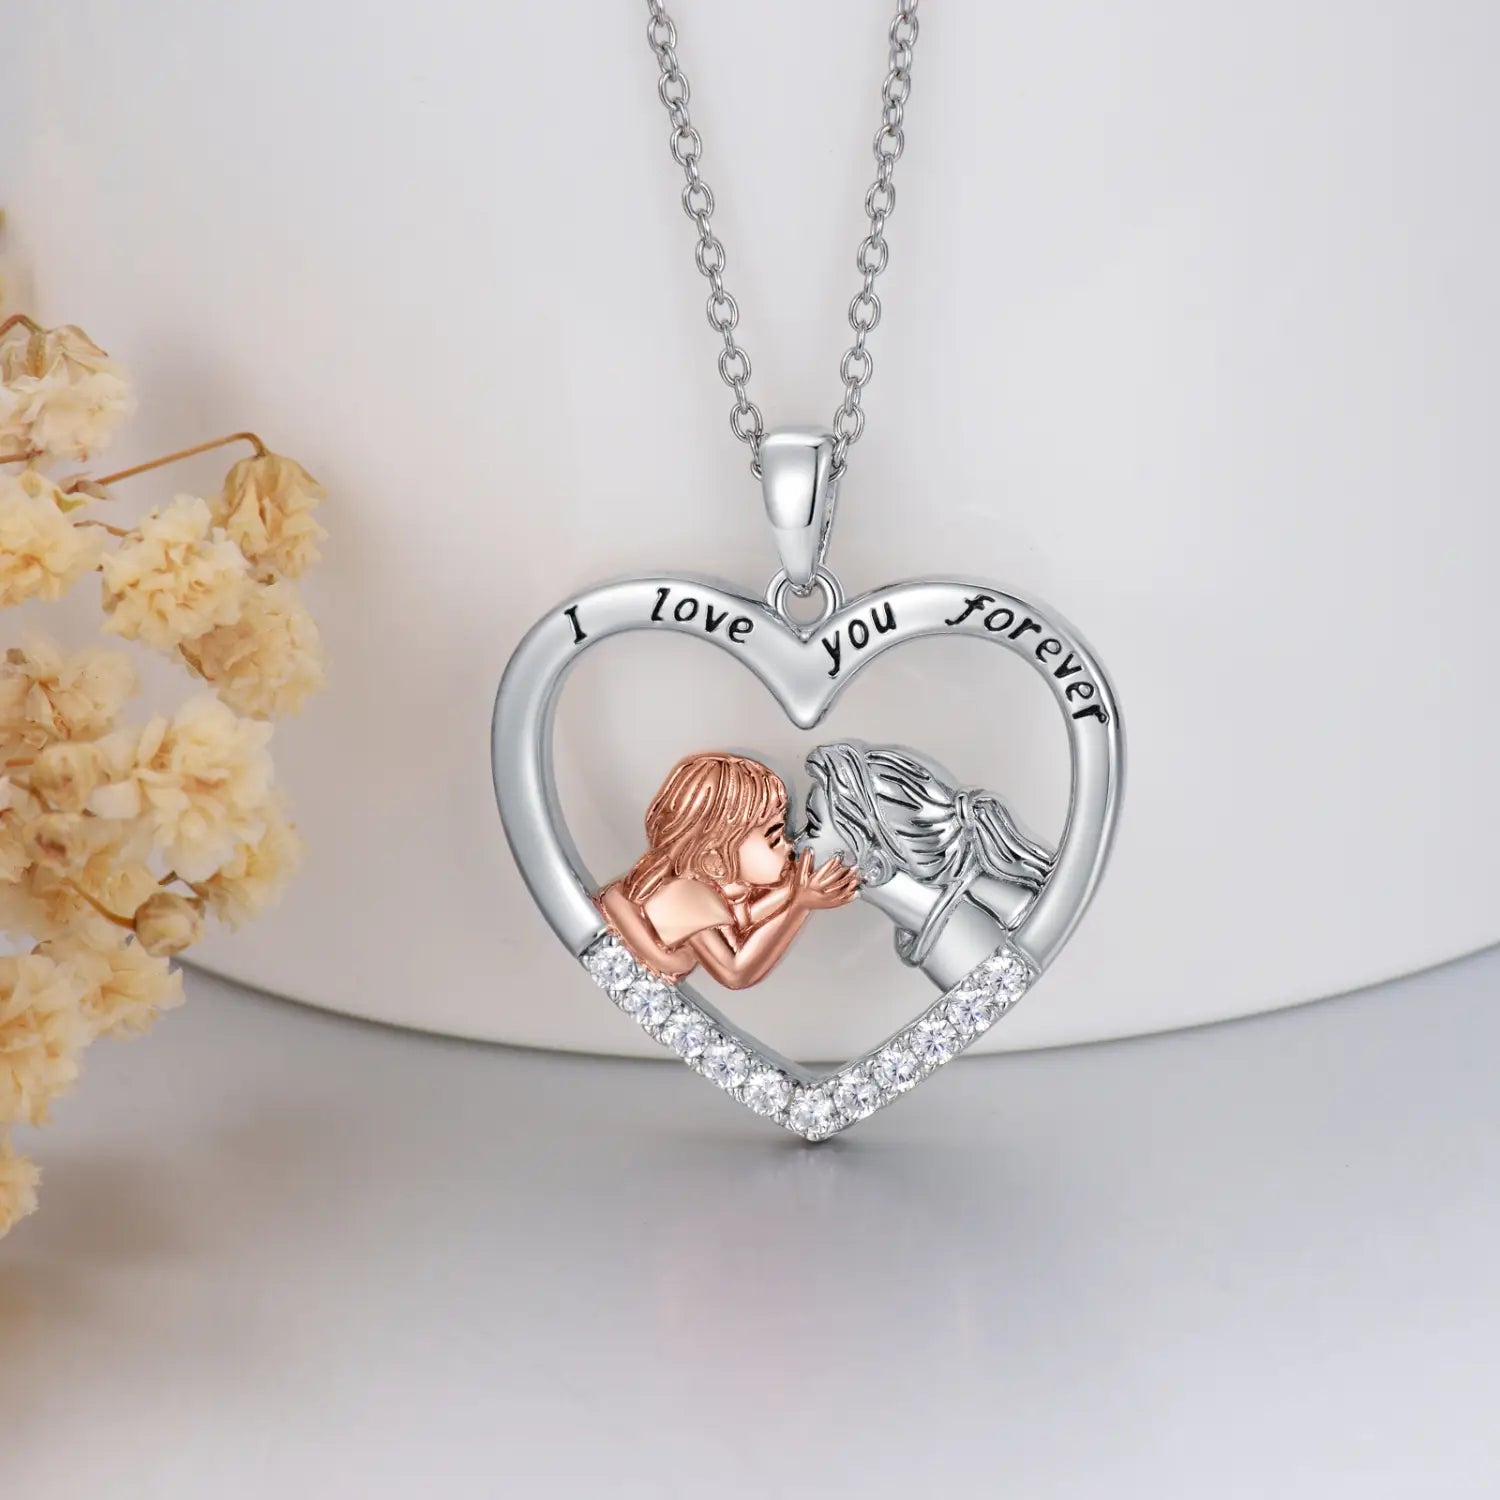 Mother Daughter Necklace